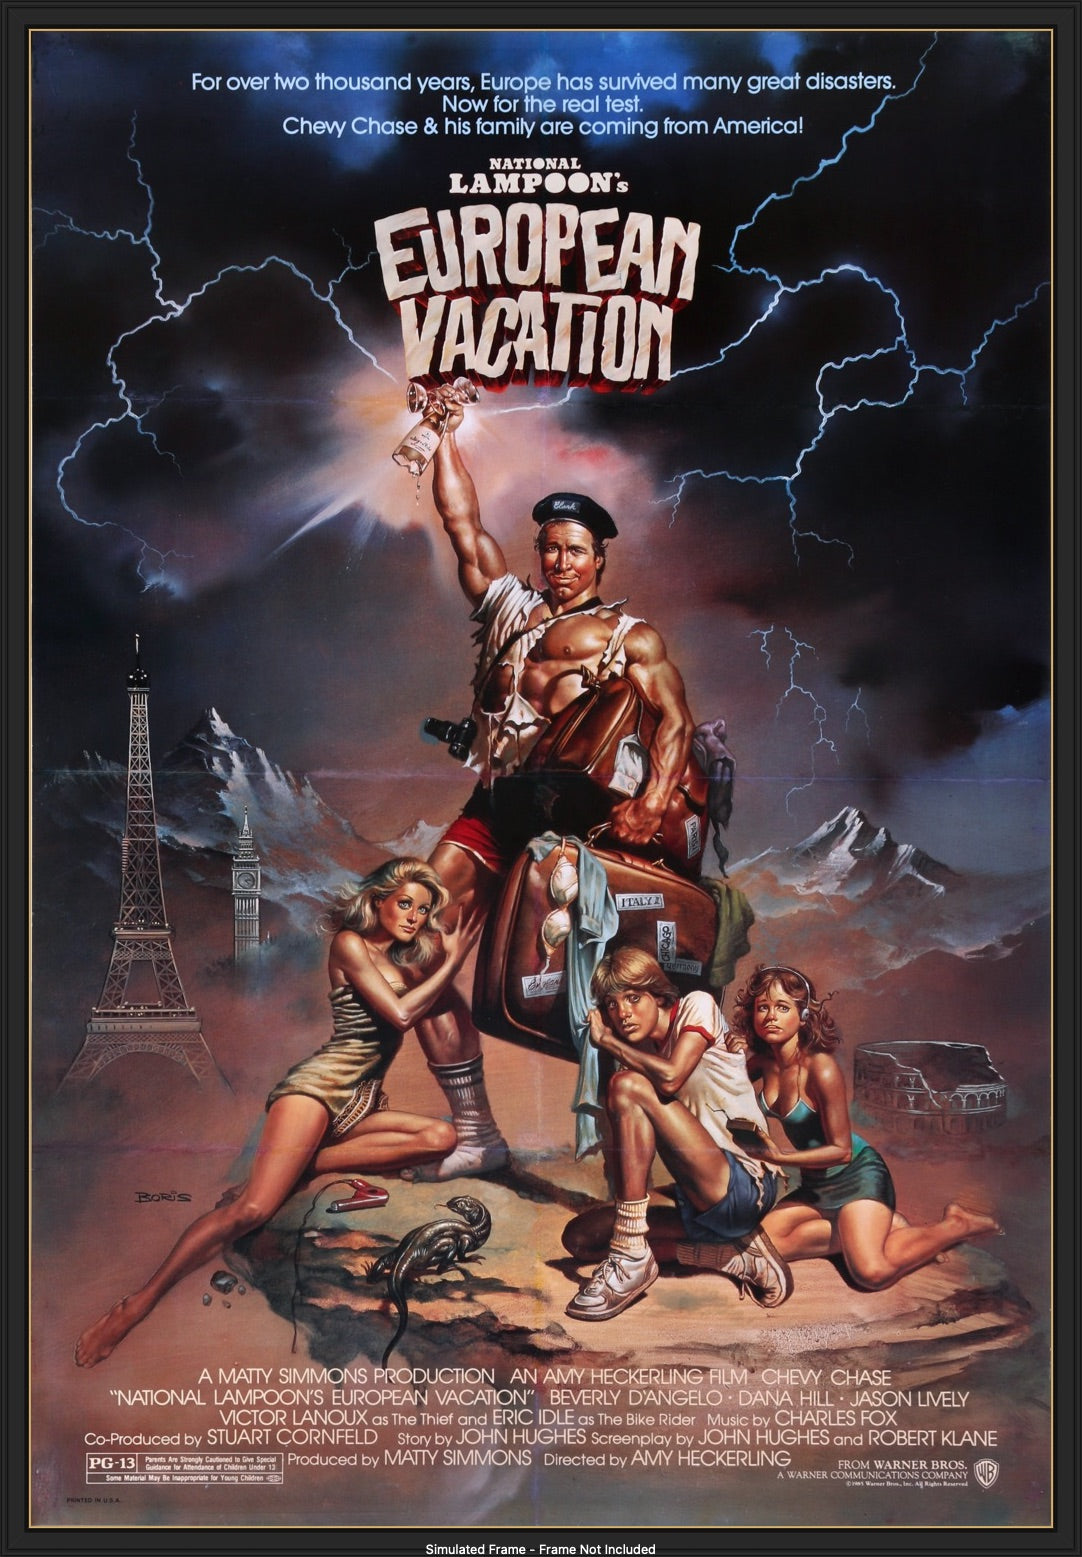 National Lampoon's European Vacation (1985) original movie poster for sale at Original Film Art